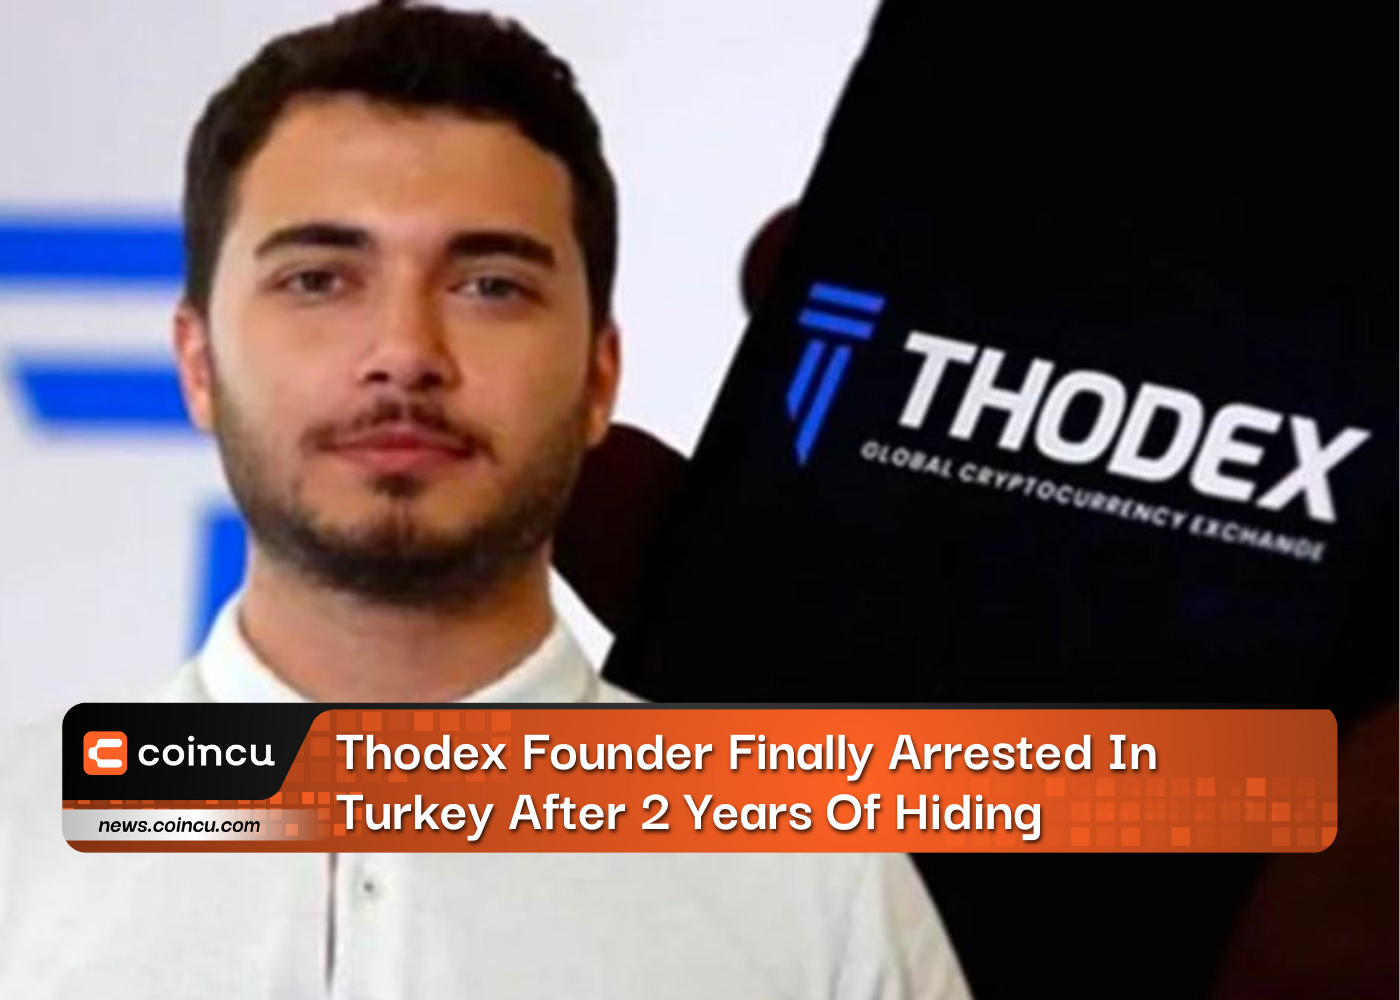 Thodex Founder Finally Arrested In Turkey After 2 Years Of Hiding